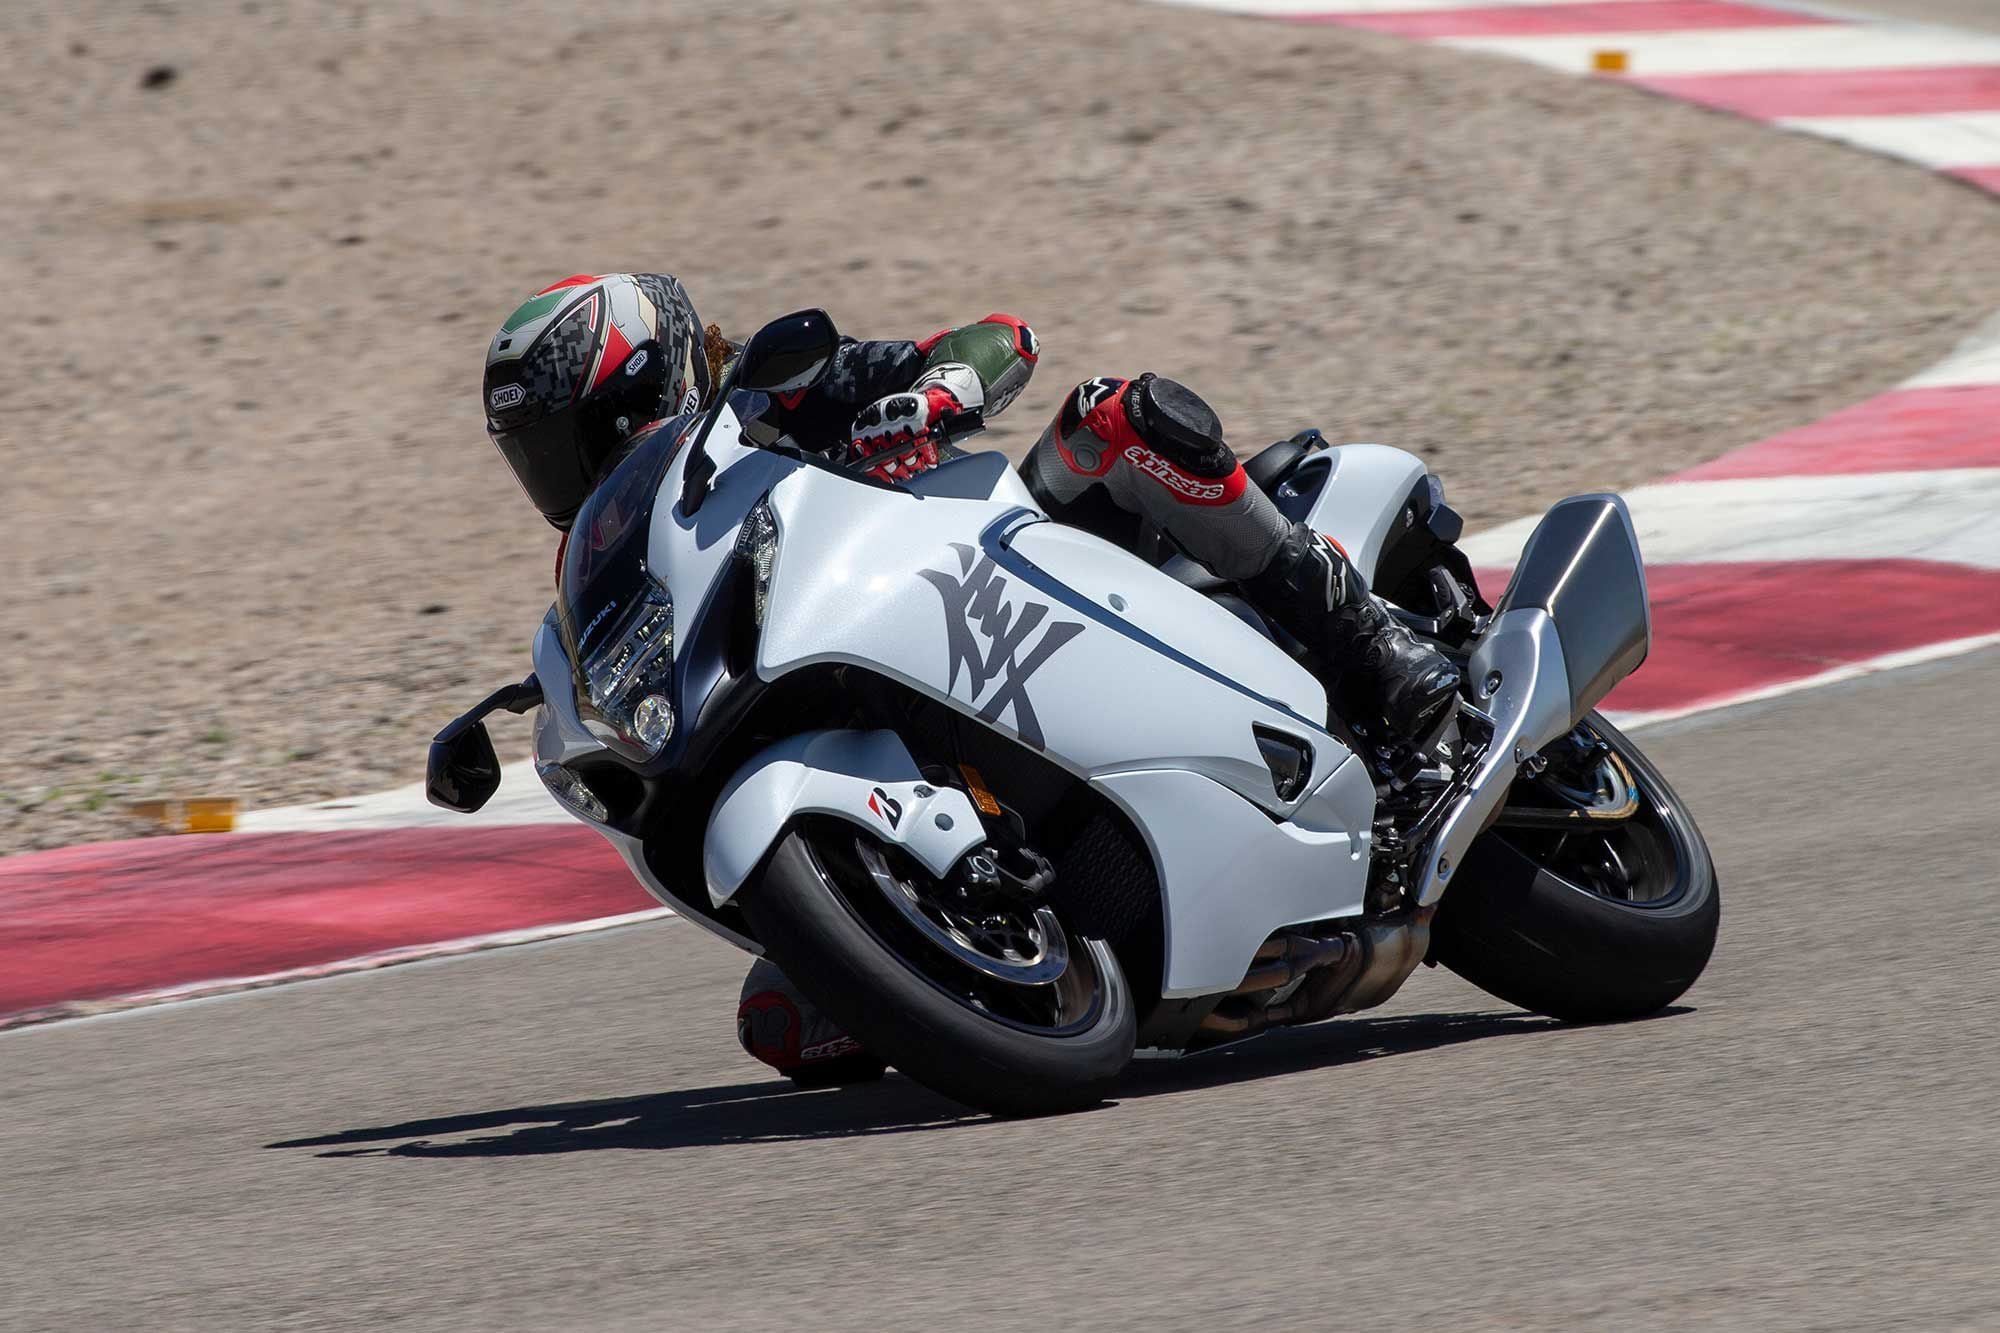 The Suzuki Hayabusa is a hoot to ride at the circuit. It’s way more capable than you’d think considering its size.